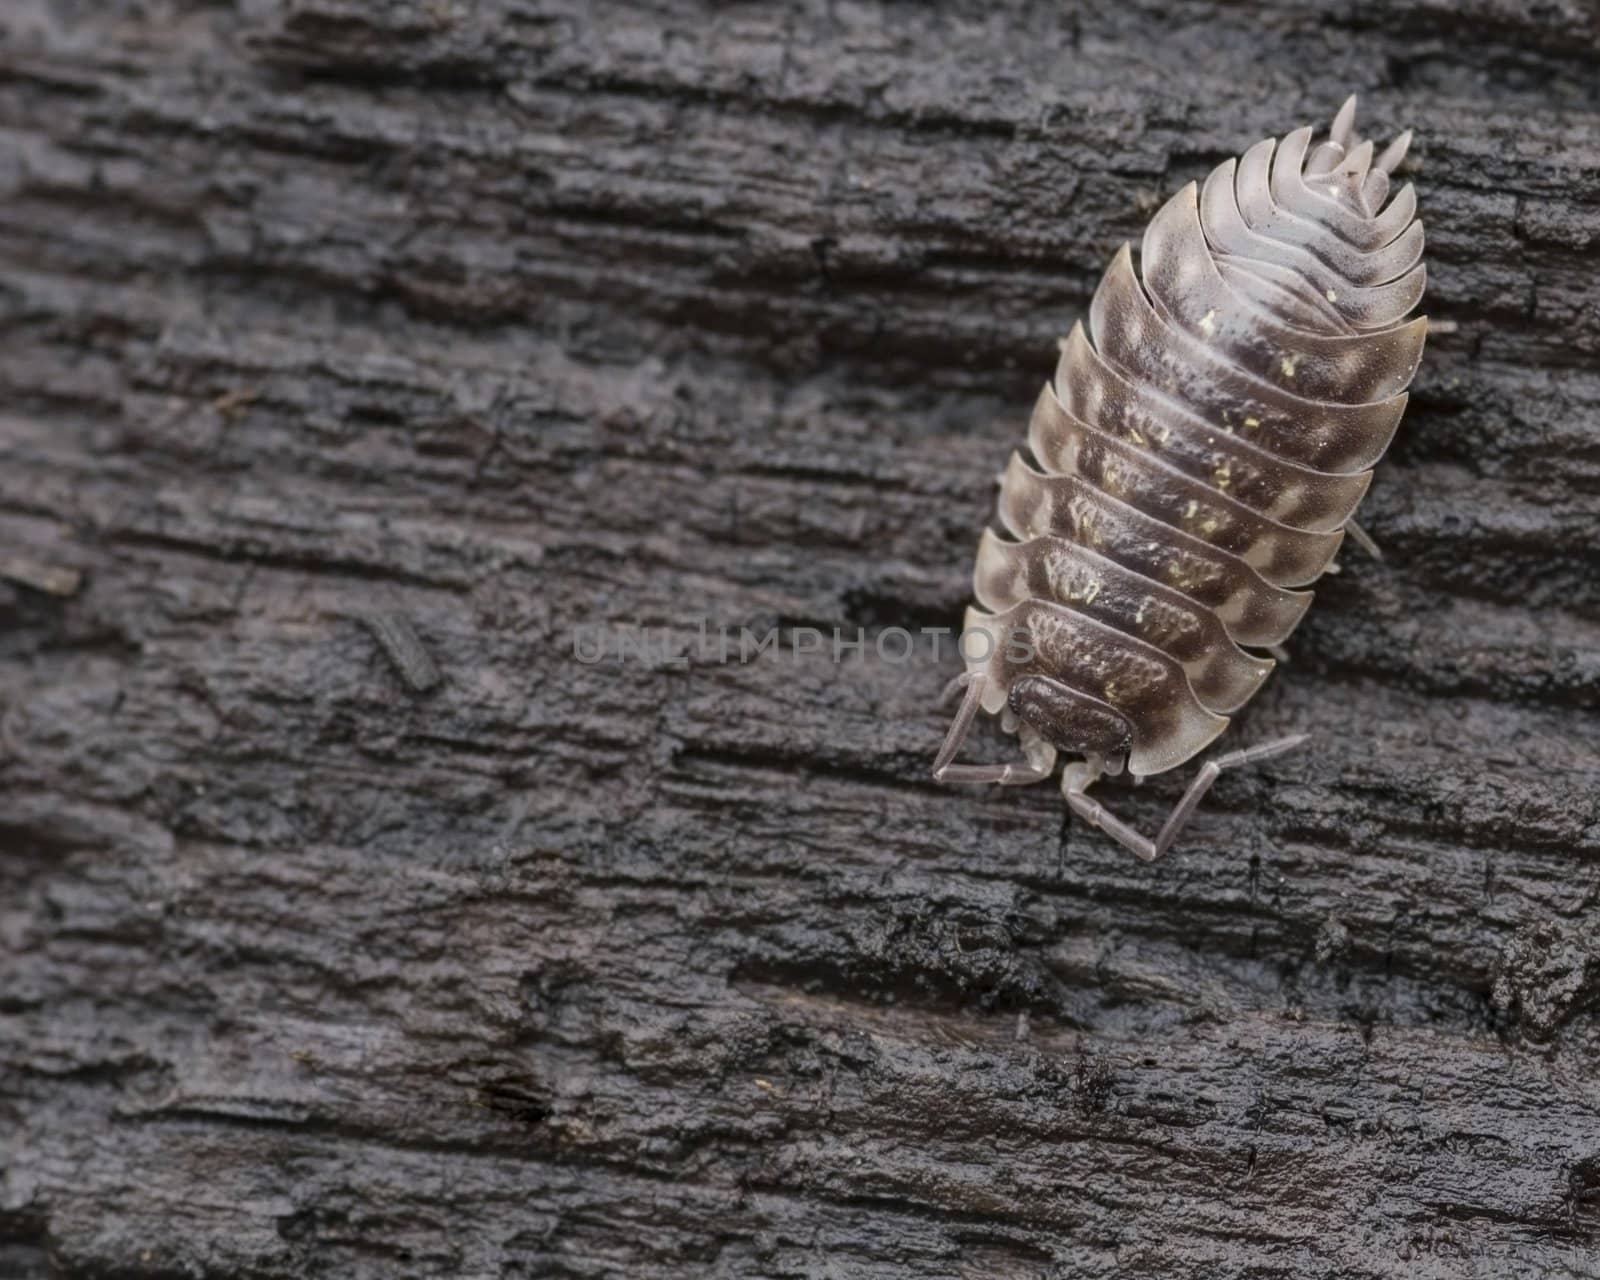 A pillbug found under a railroad tie in early spring.